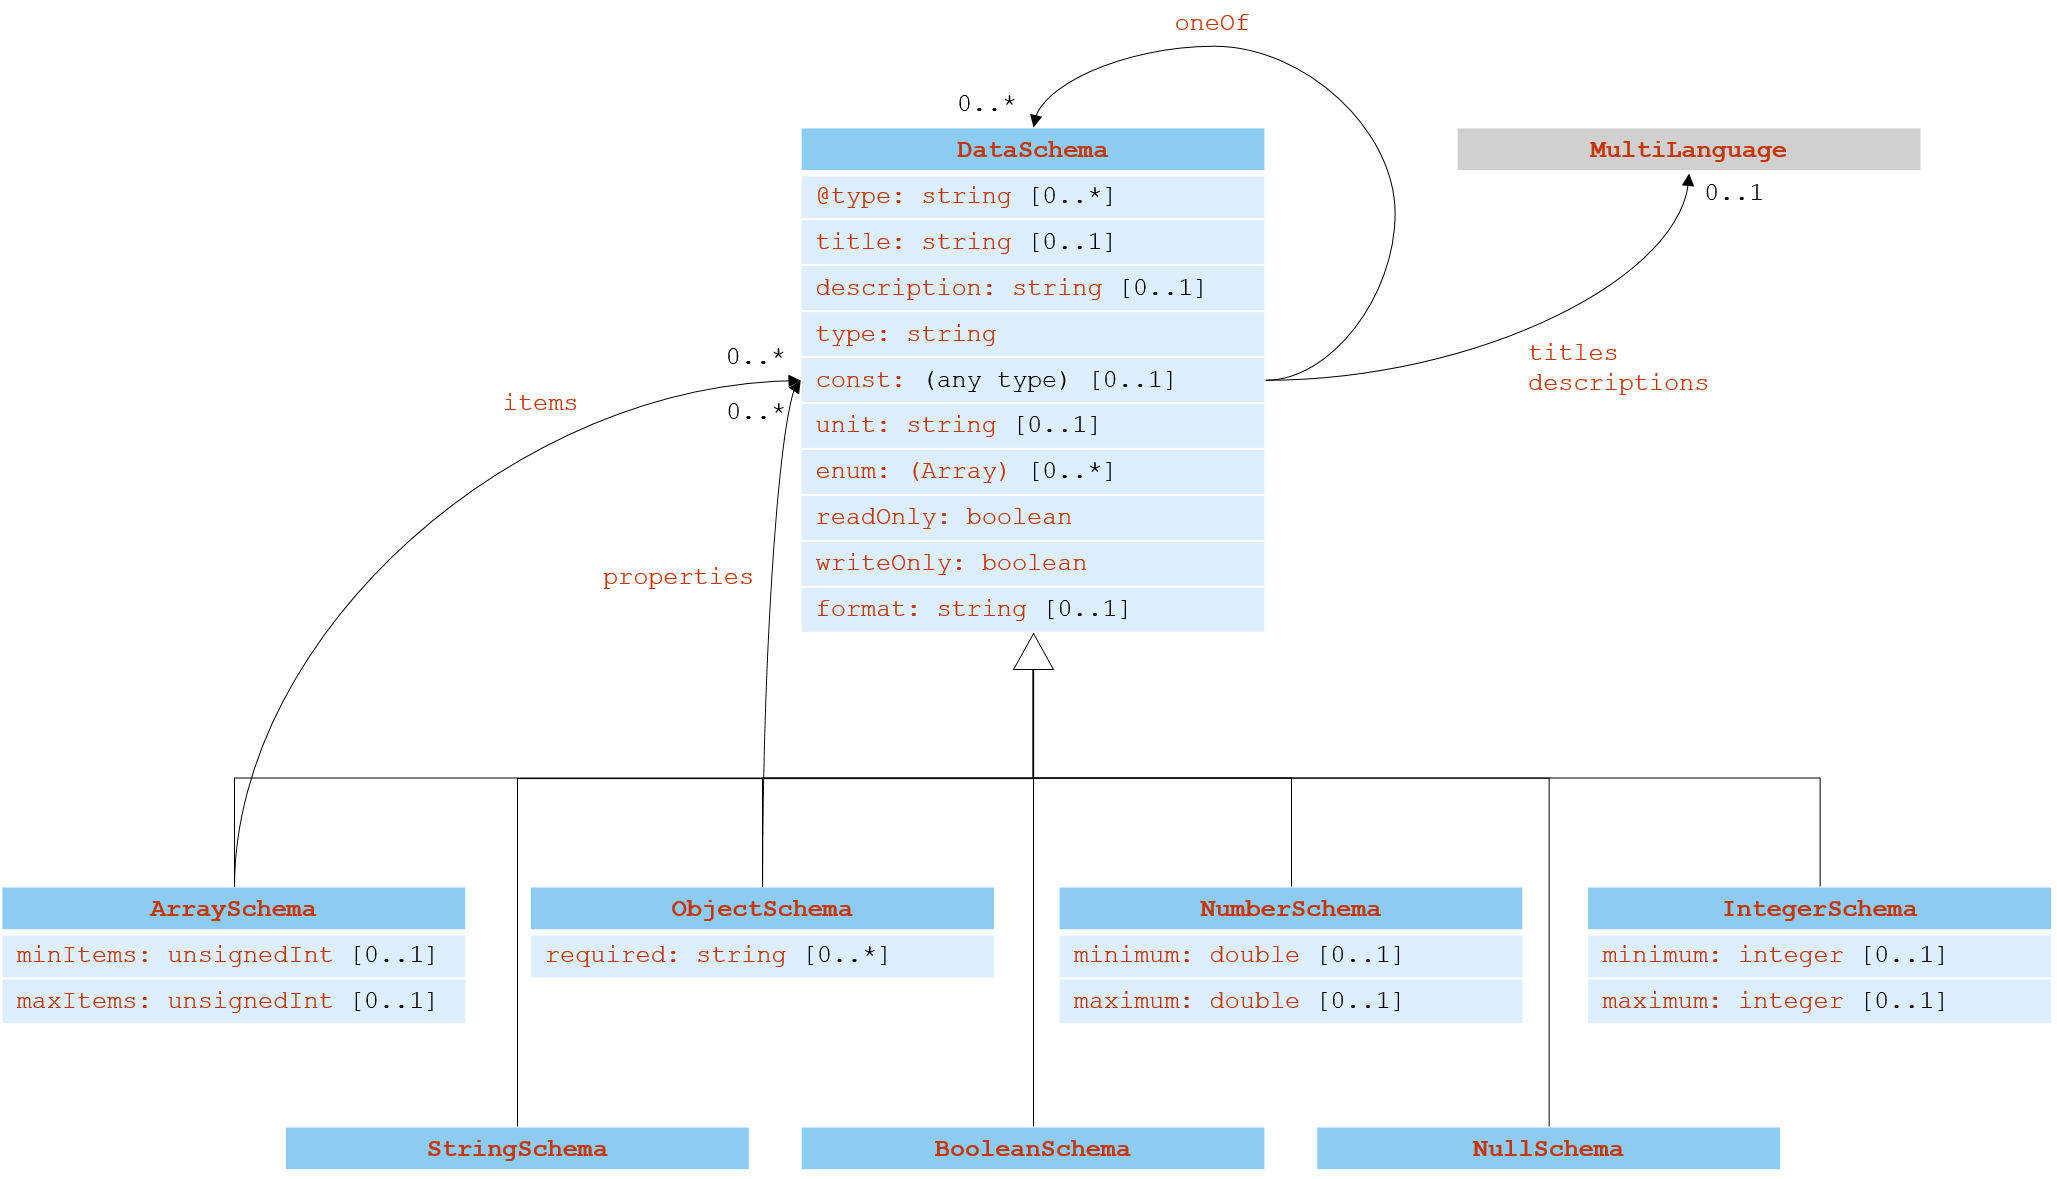 UML diagram of the TD information model for the JSON schema vocabulary